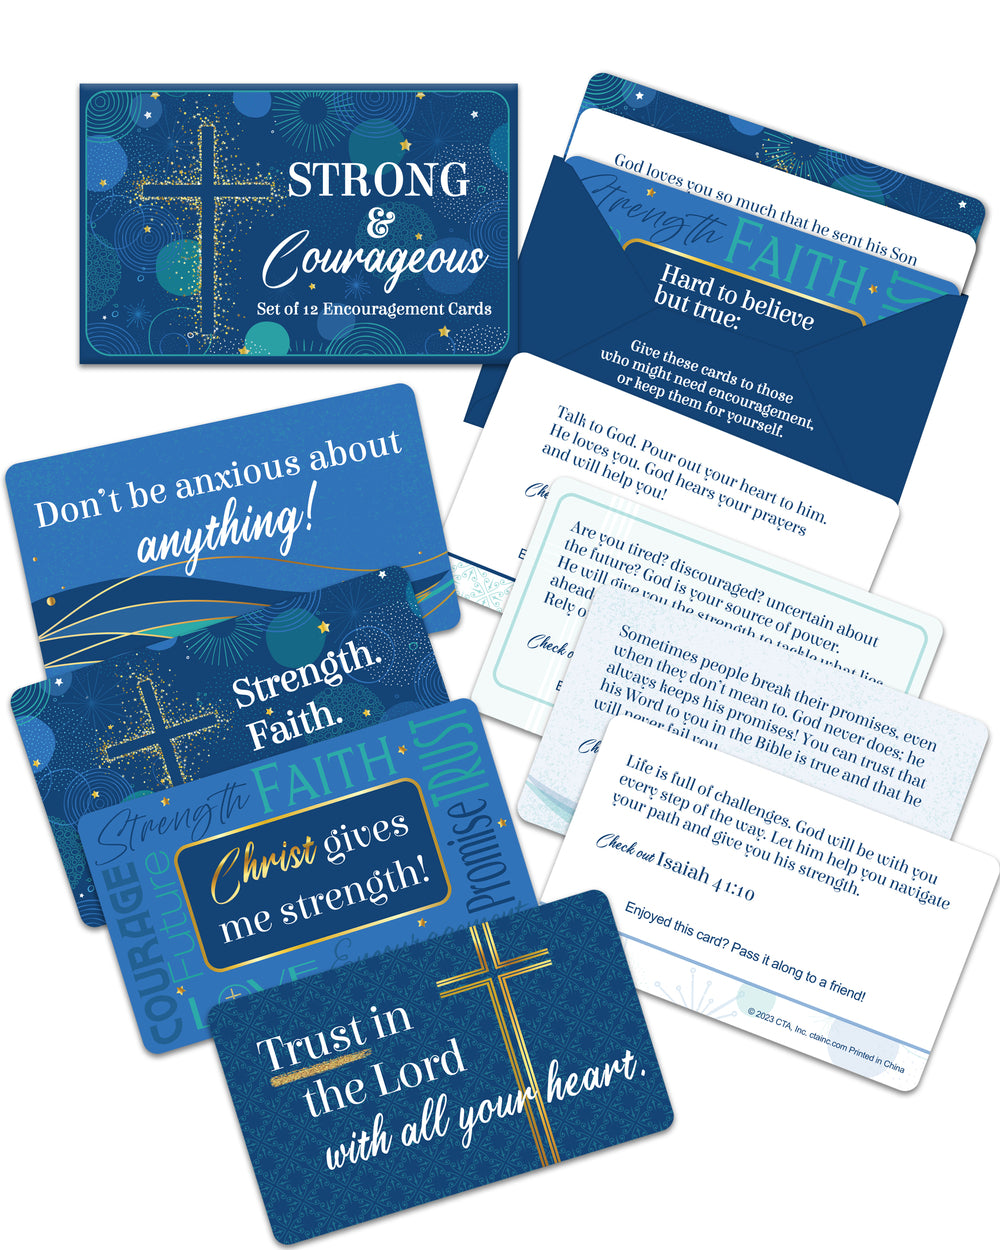 Cards of Encouragement - Strong & Courageous